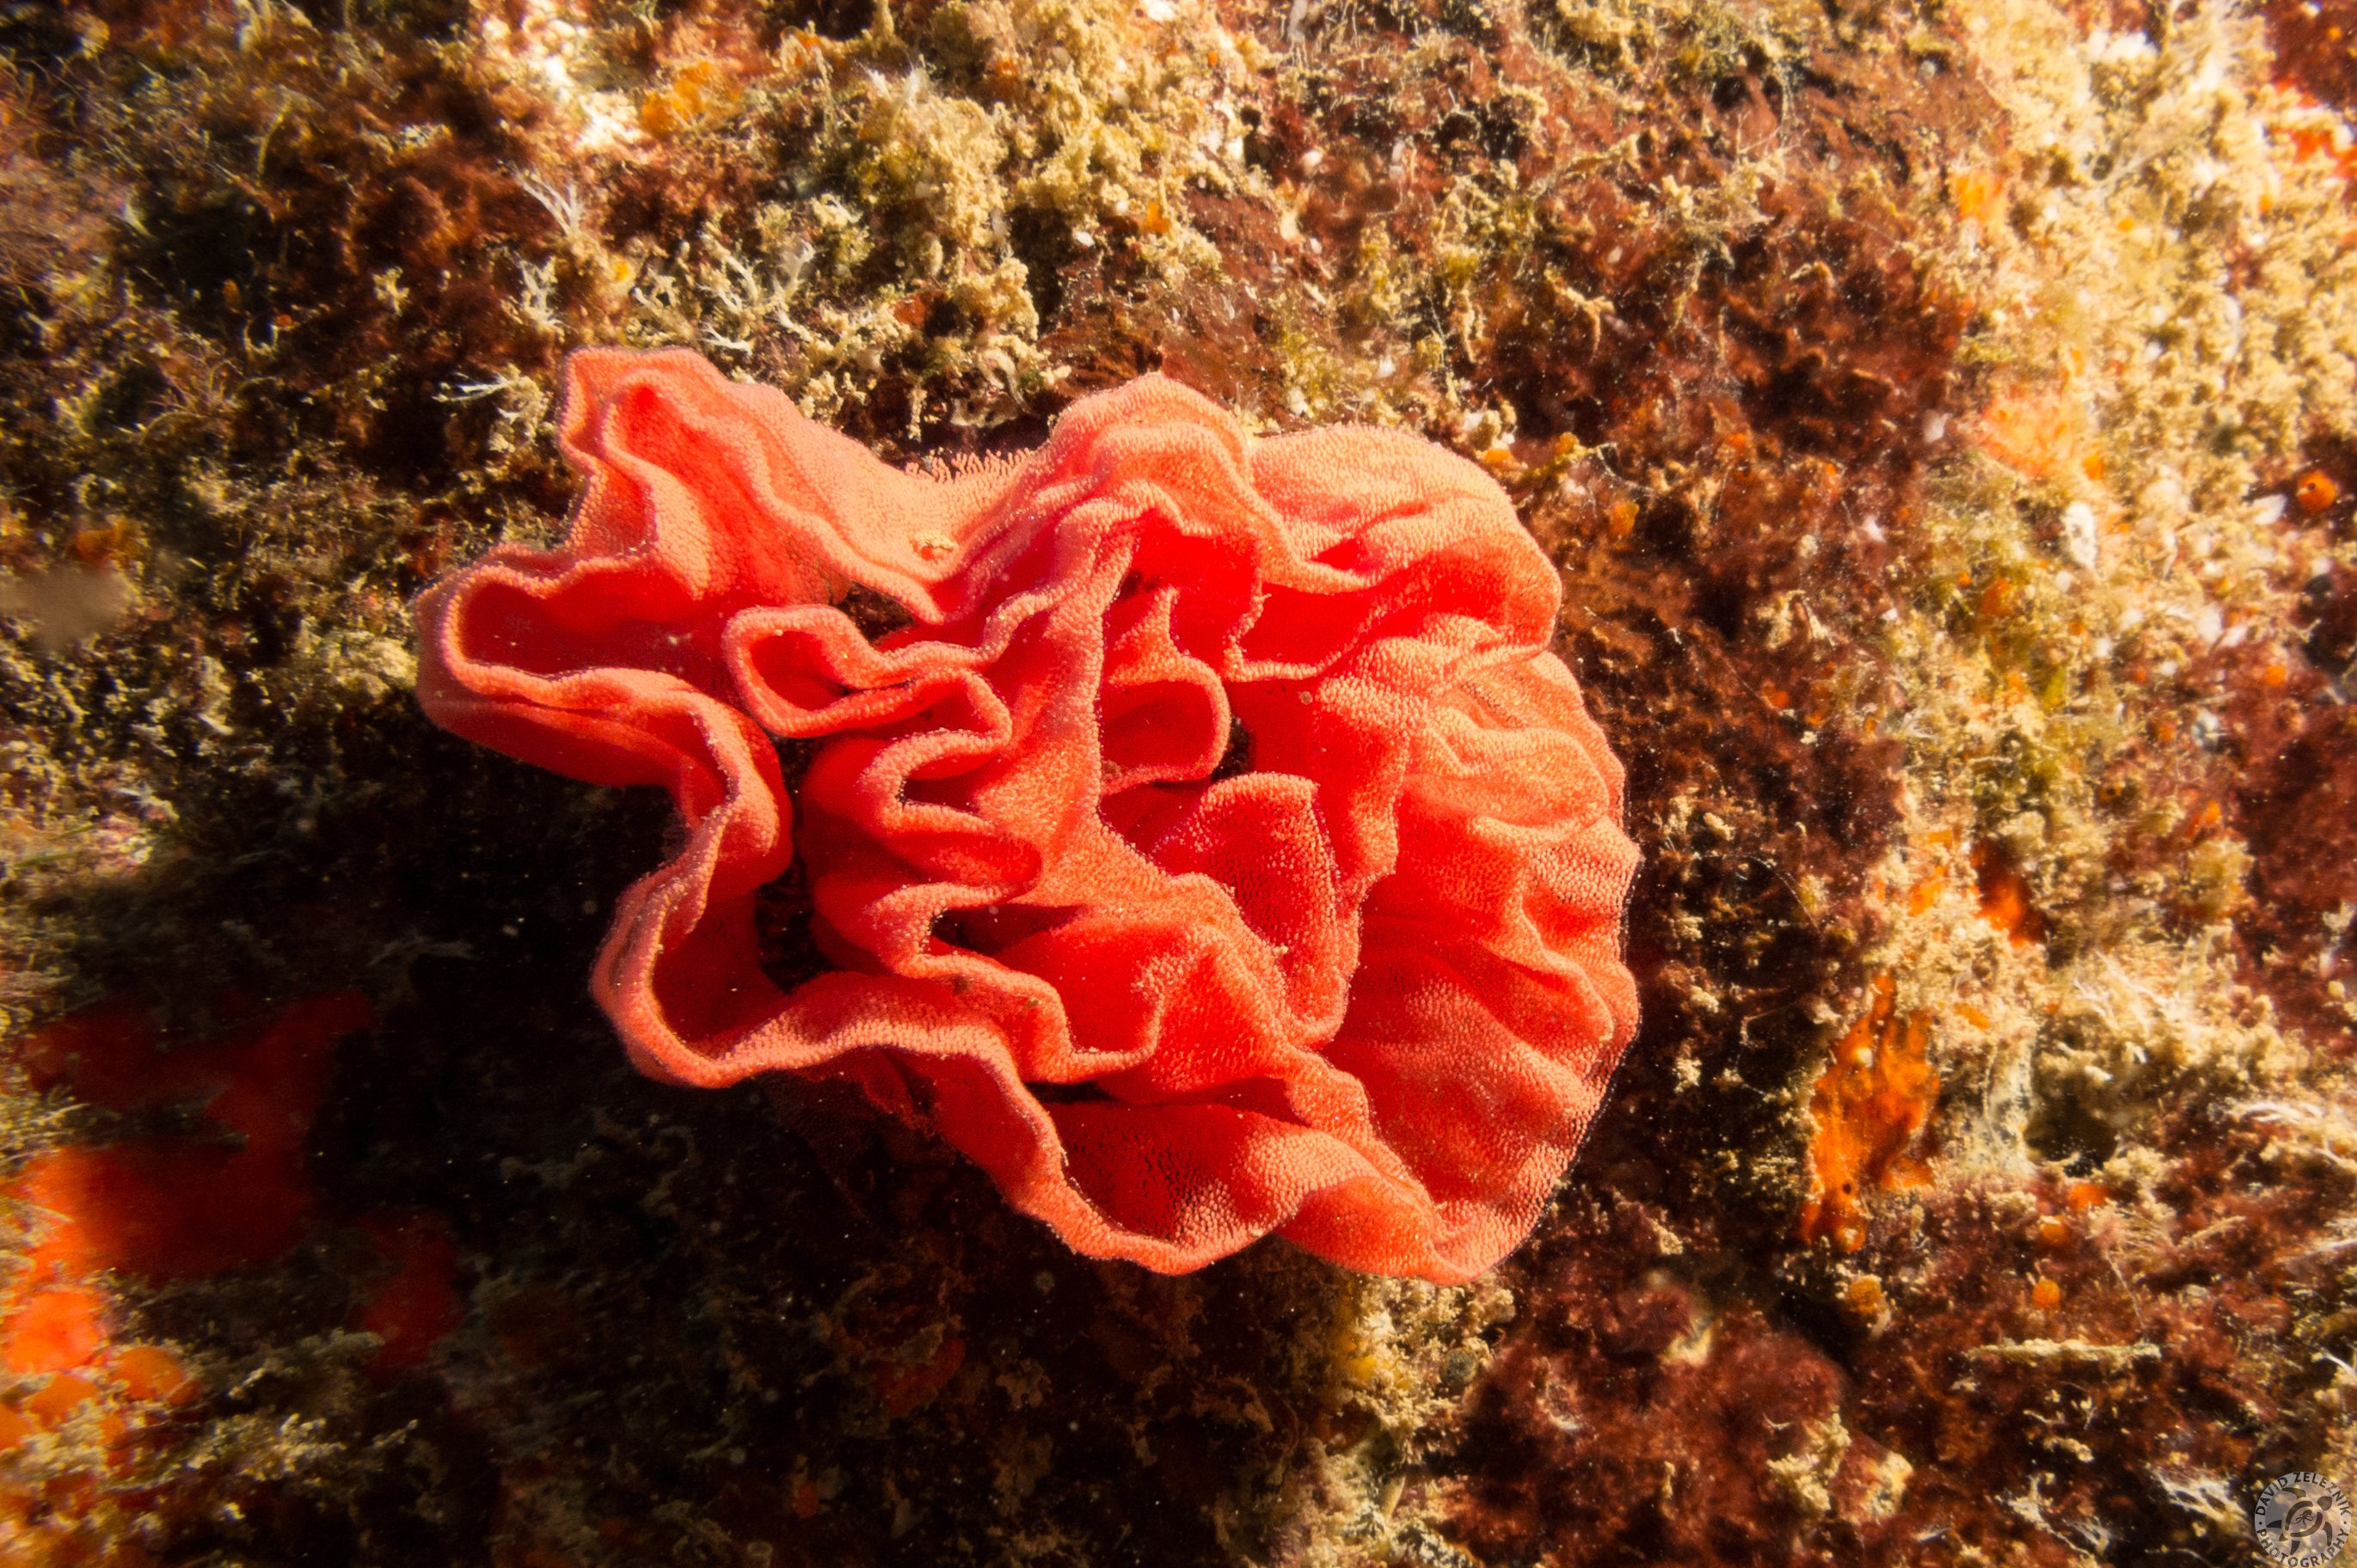 The rose-shaped egg sac of the Spanish Dancer nudibranch<br/><small>Tunnels Reef, Kauai</small>